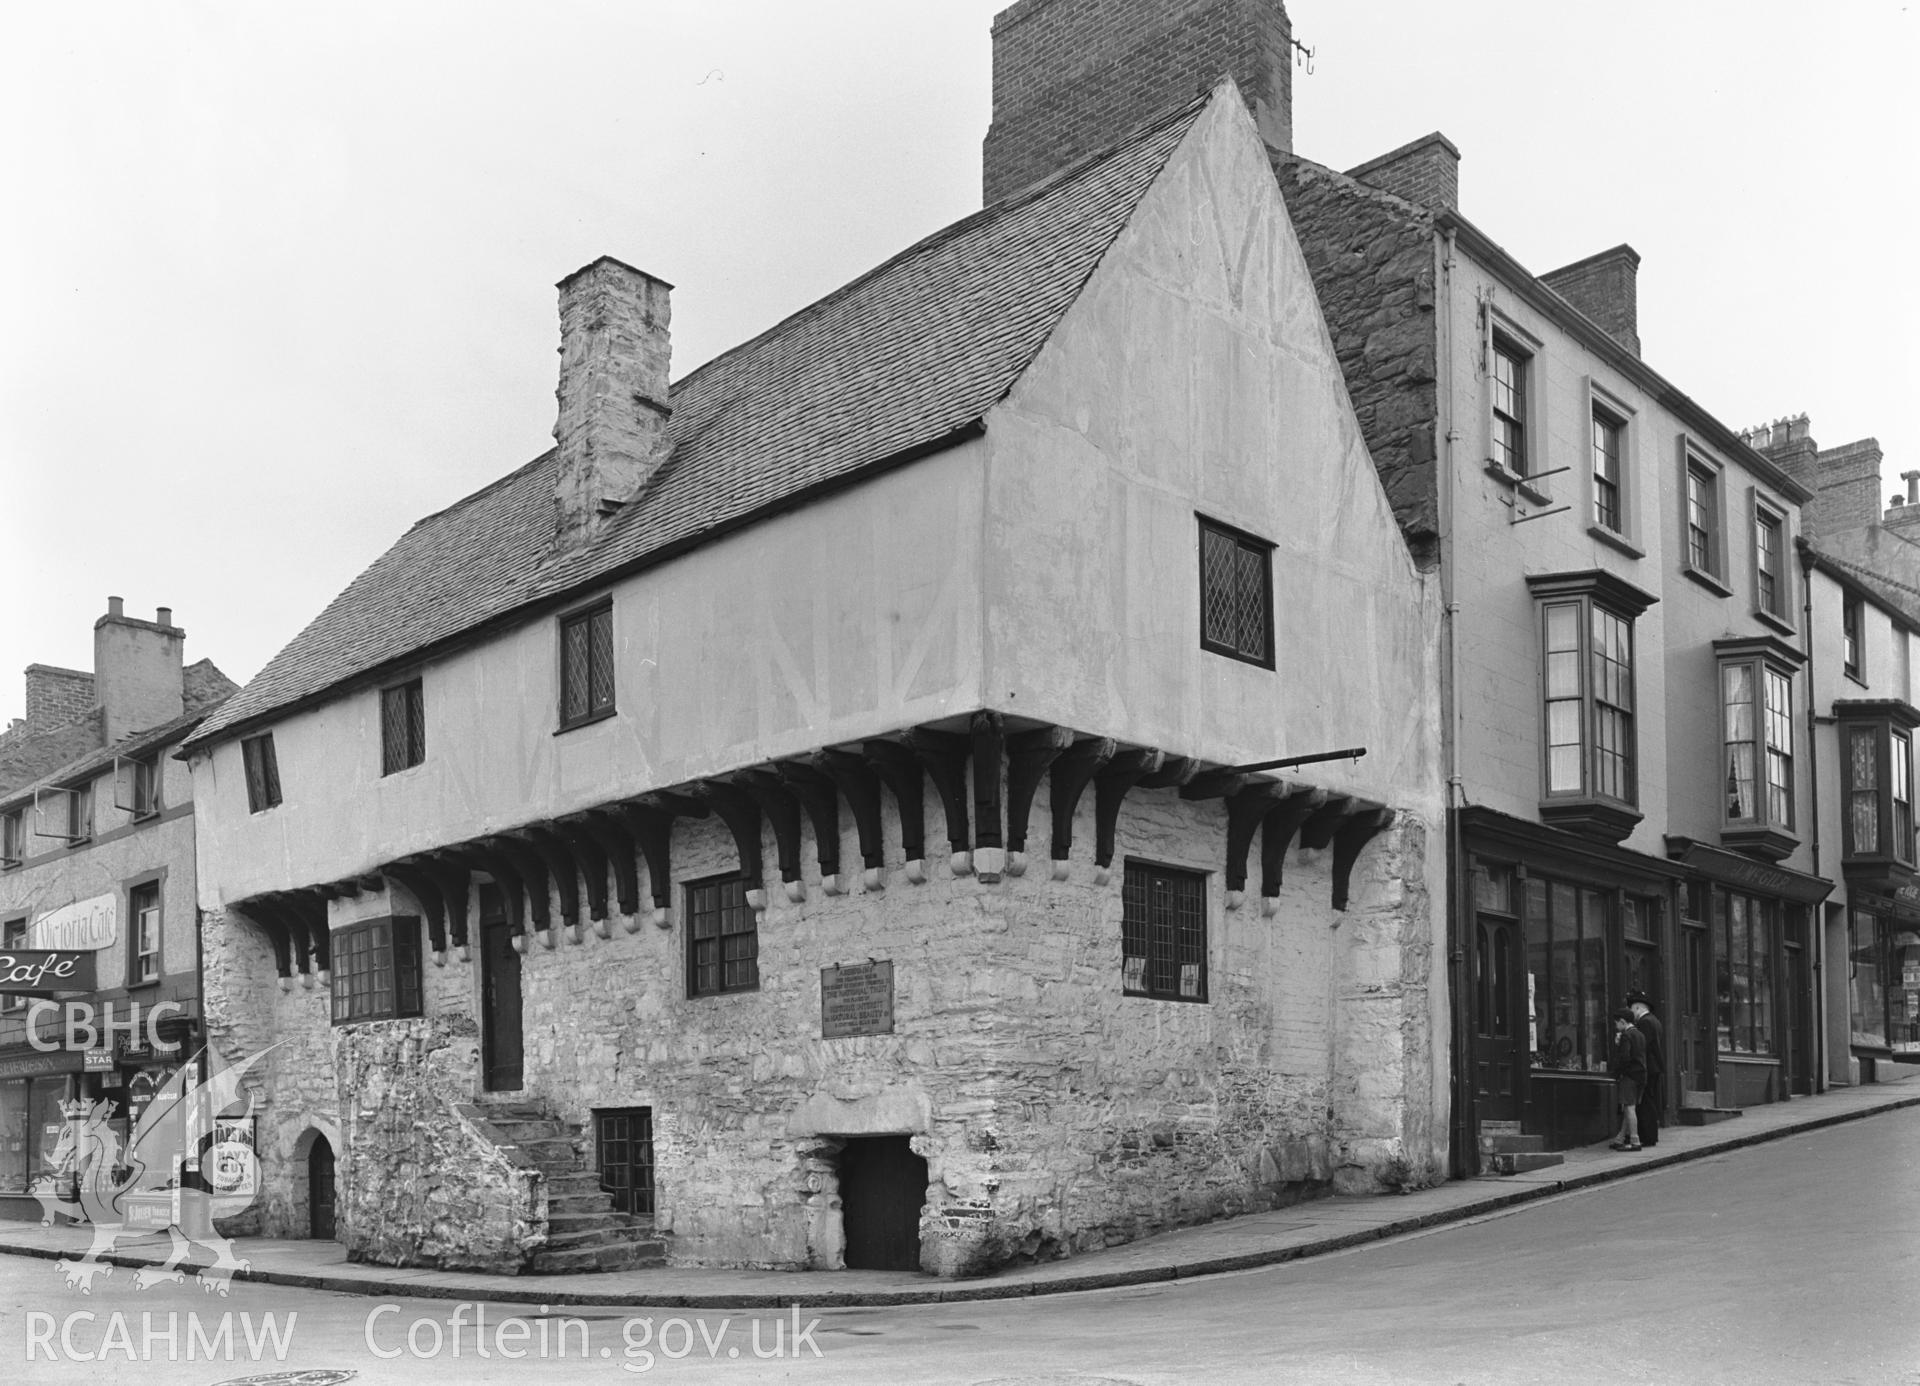 Exterior view showing the Castle Street and High Street corner.